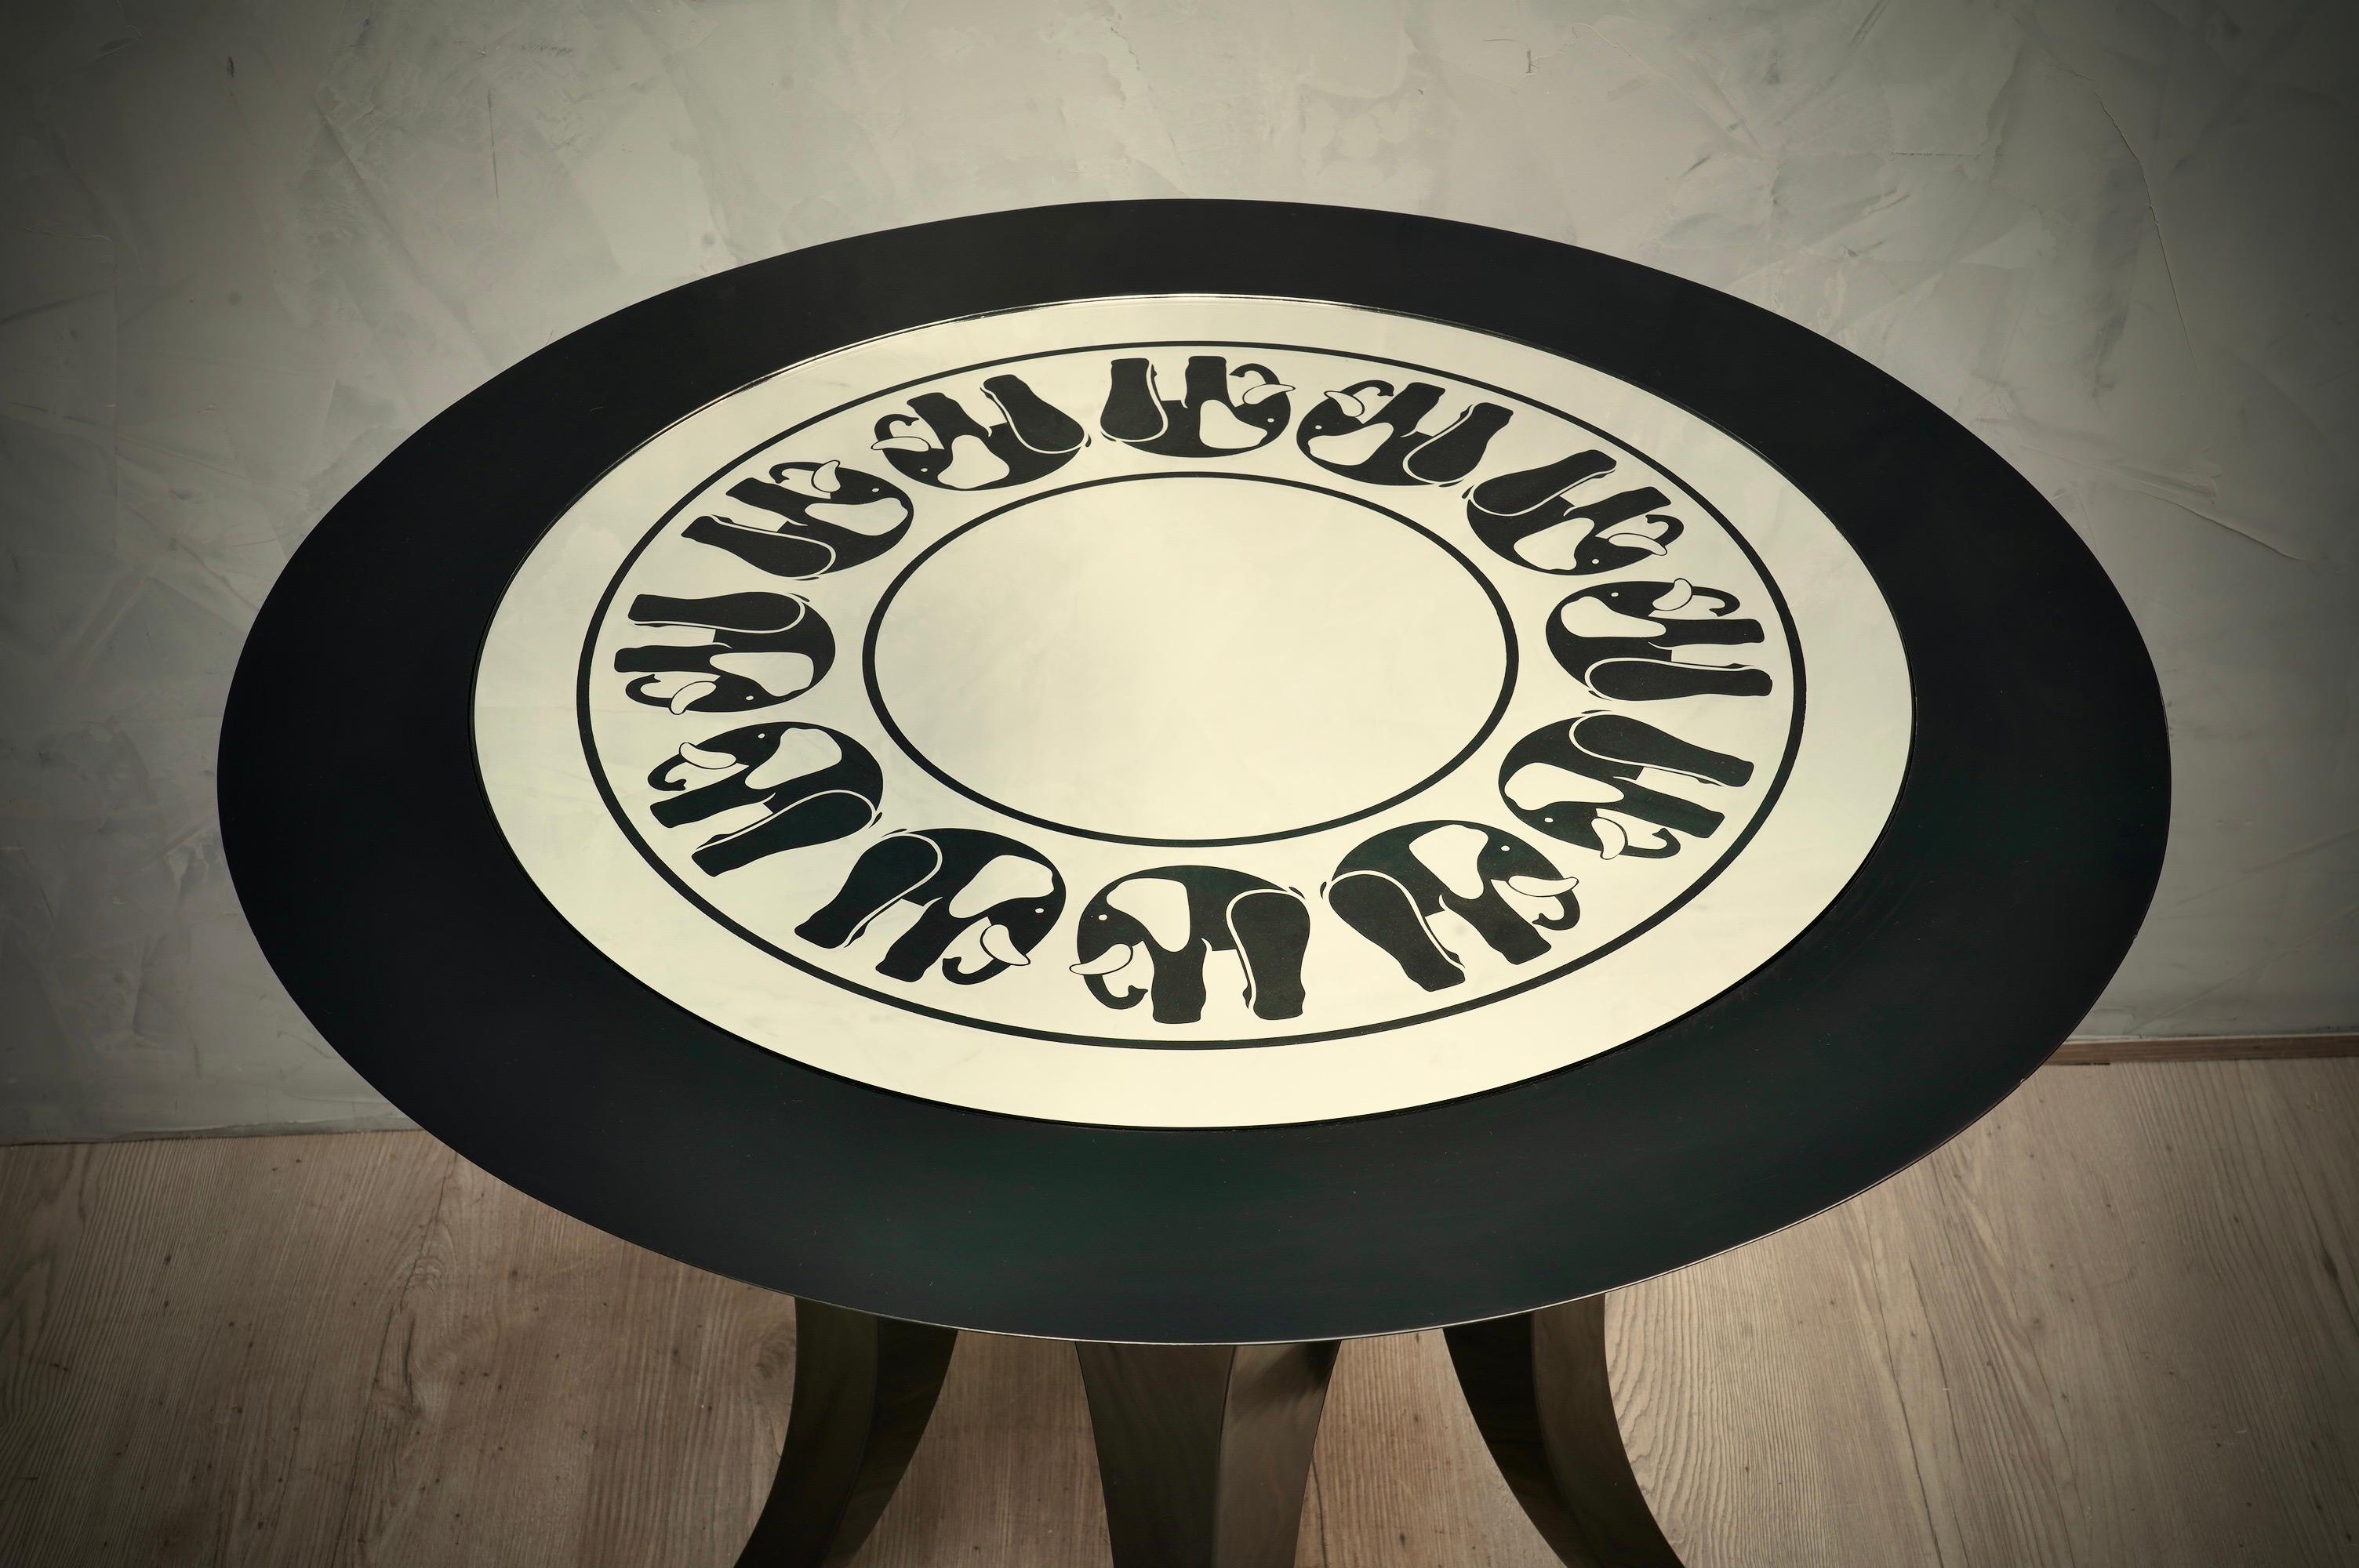 Surprising design for this coffee table, with an unmistakable Italian style, profoundly characterized in its qualities by an engraved and black-coloured mirror. Perfect combination of materials and finishing choices.

The coffee table has a massive